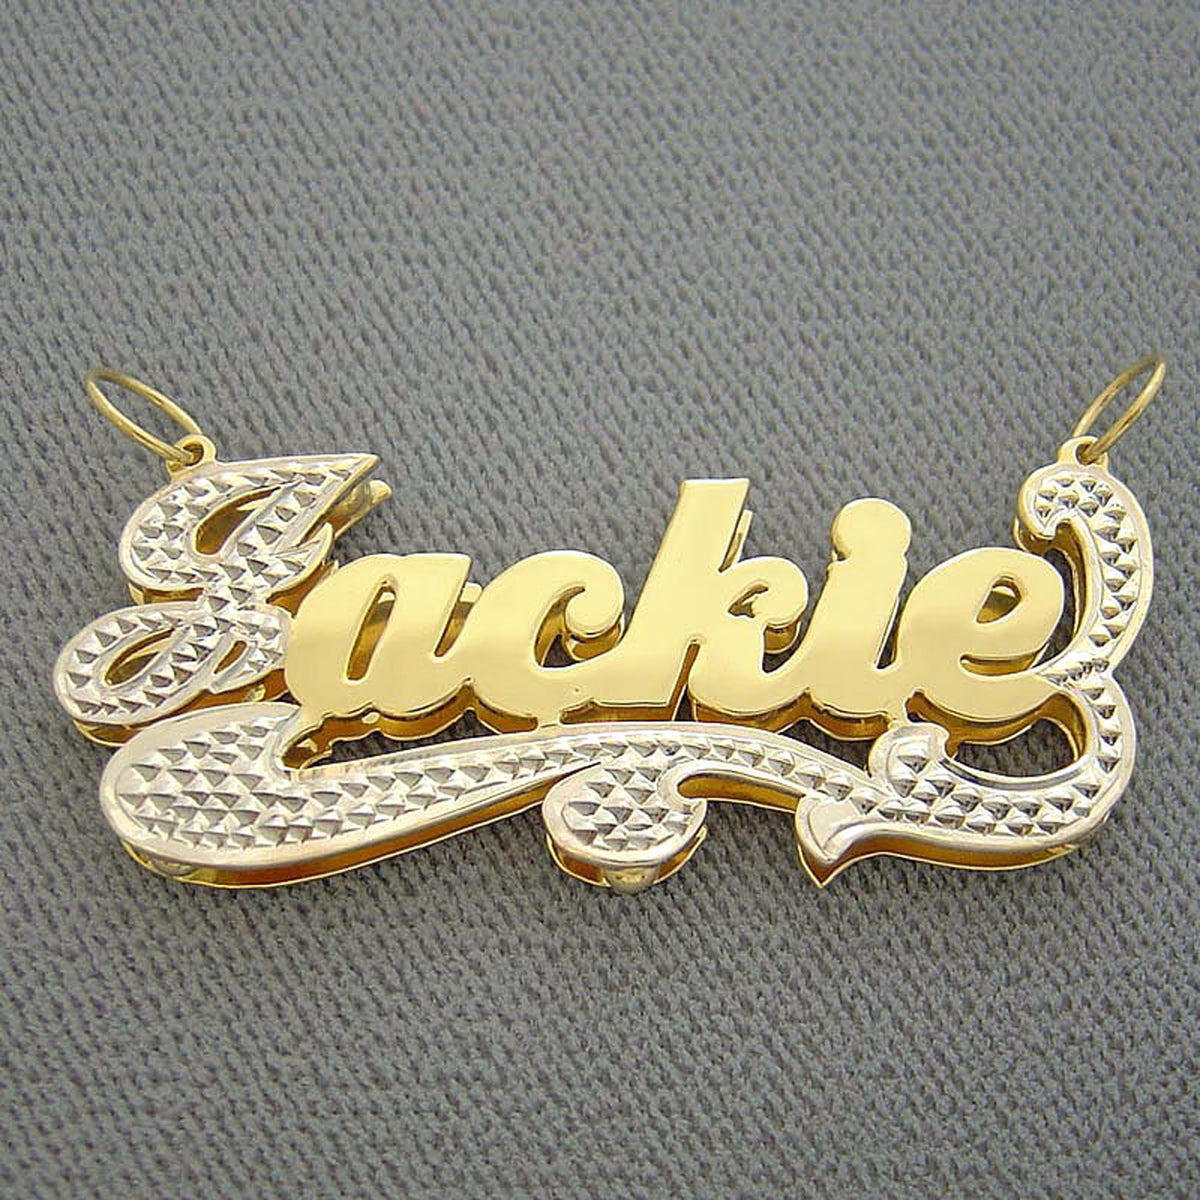 Personalized Jewelry Diamond Name Pendant Charm Solid 10k or 14k gold 2 Tone Fine Jewelry ND17